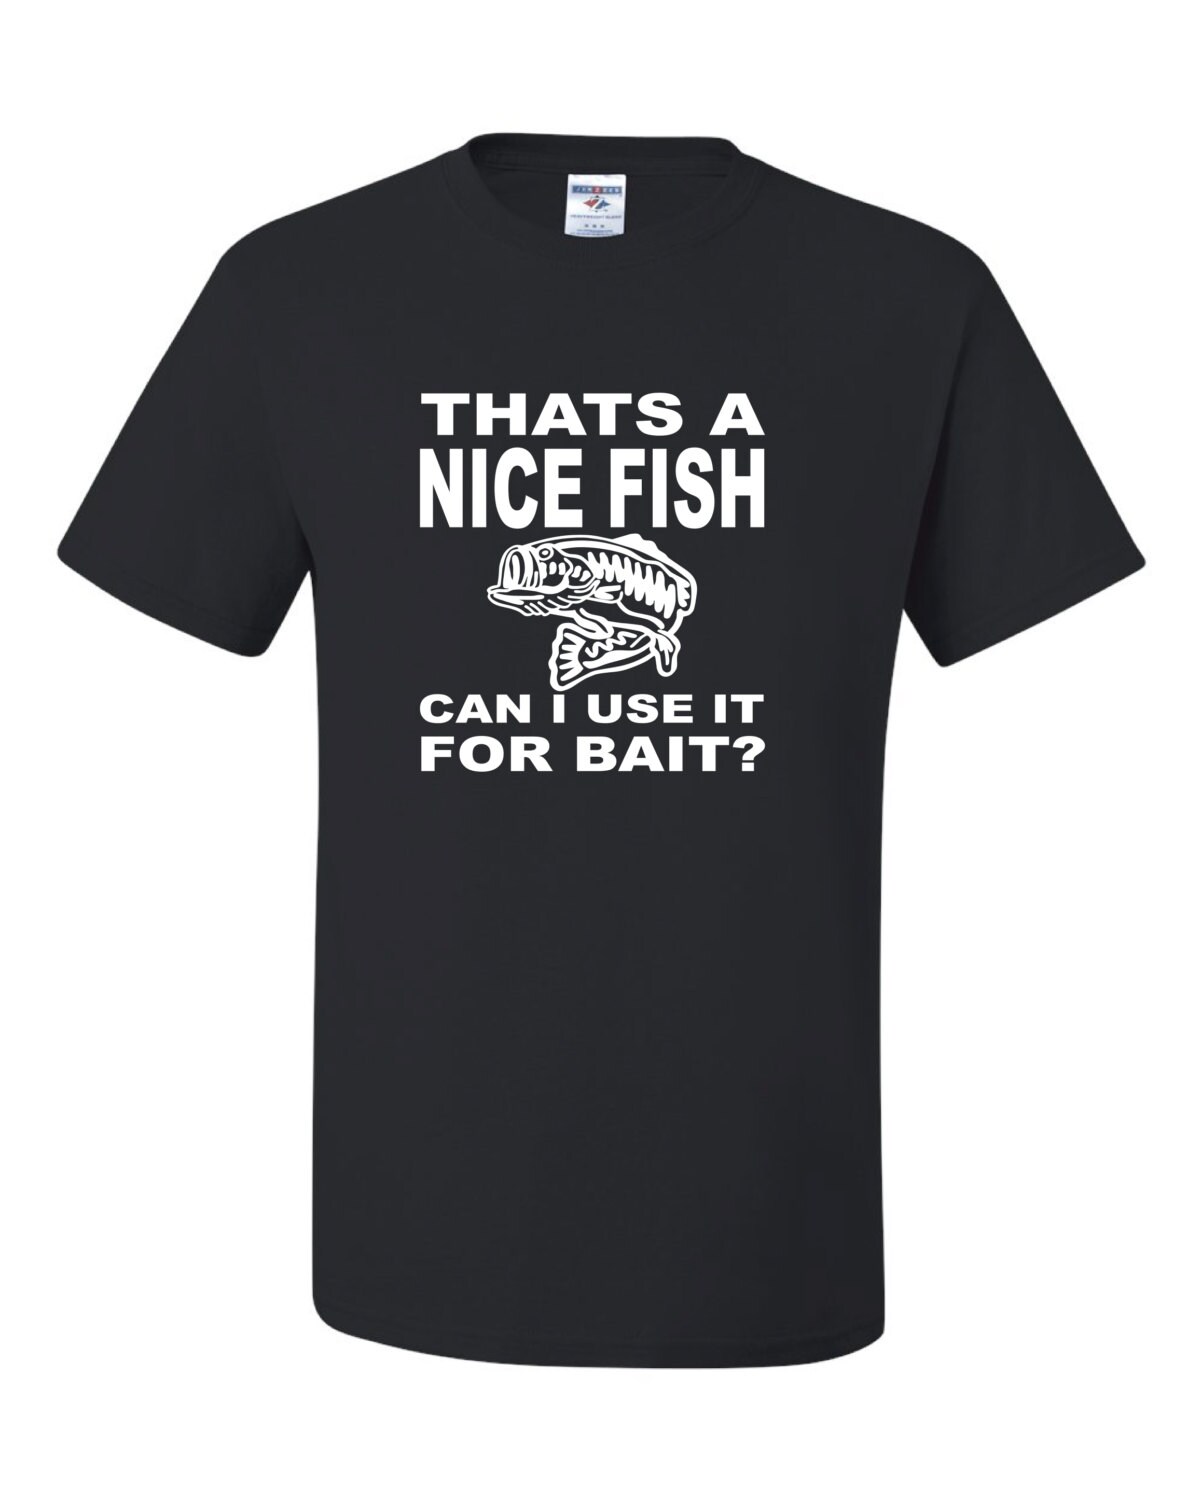 Thats A Nice Fish Can I Use It for Bait, Fishing T-shirt, Men's